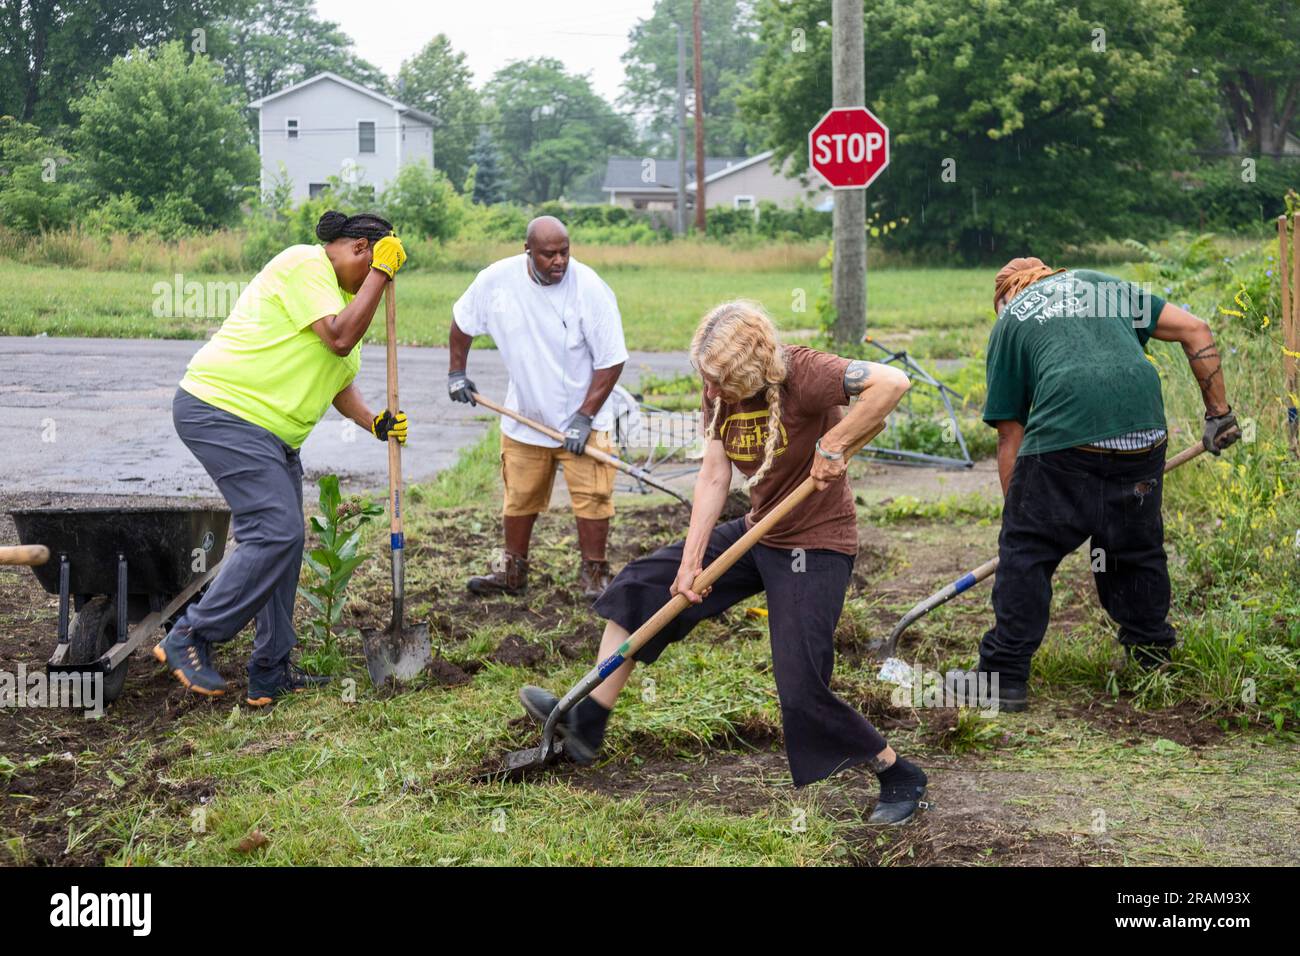 Detroit, Michigan - Volunteers clear weeds and grass in preparation for planting a roadside garden in the Morningside neighborhood. Stock Photo